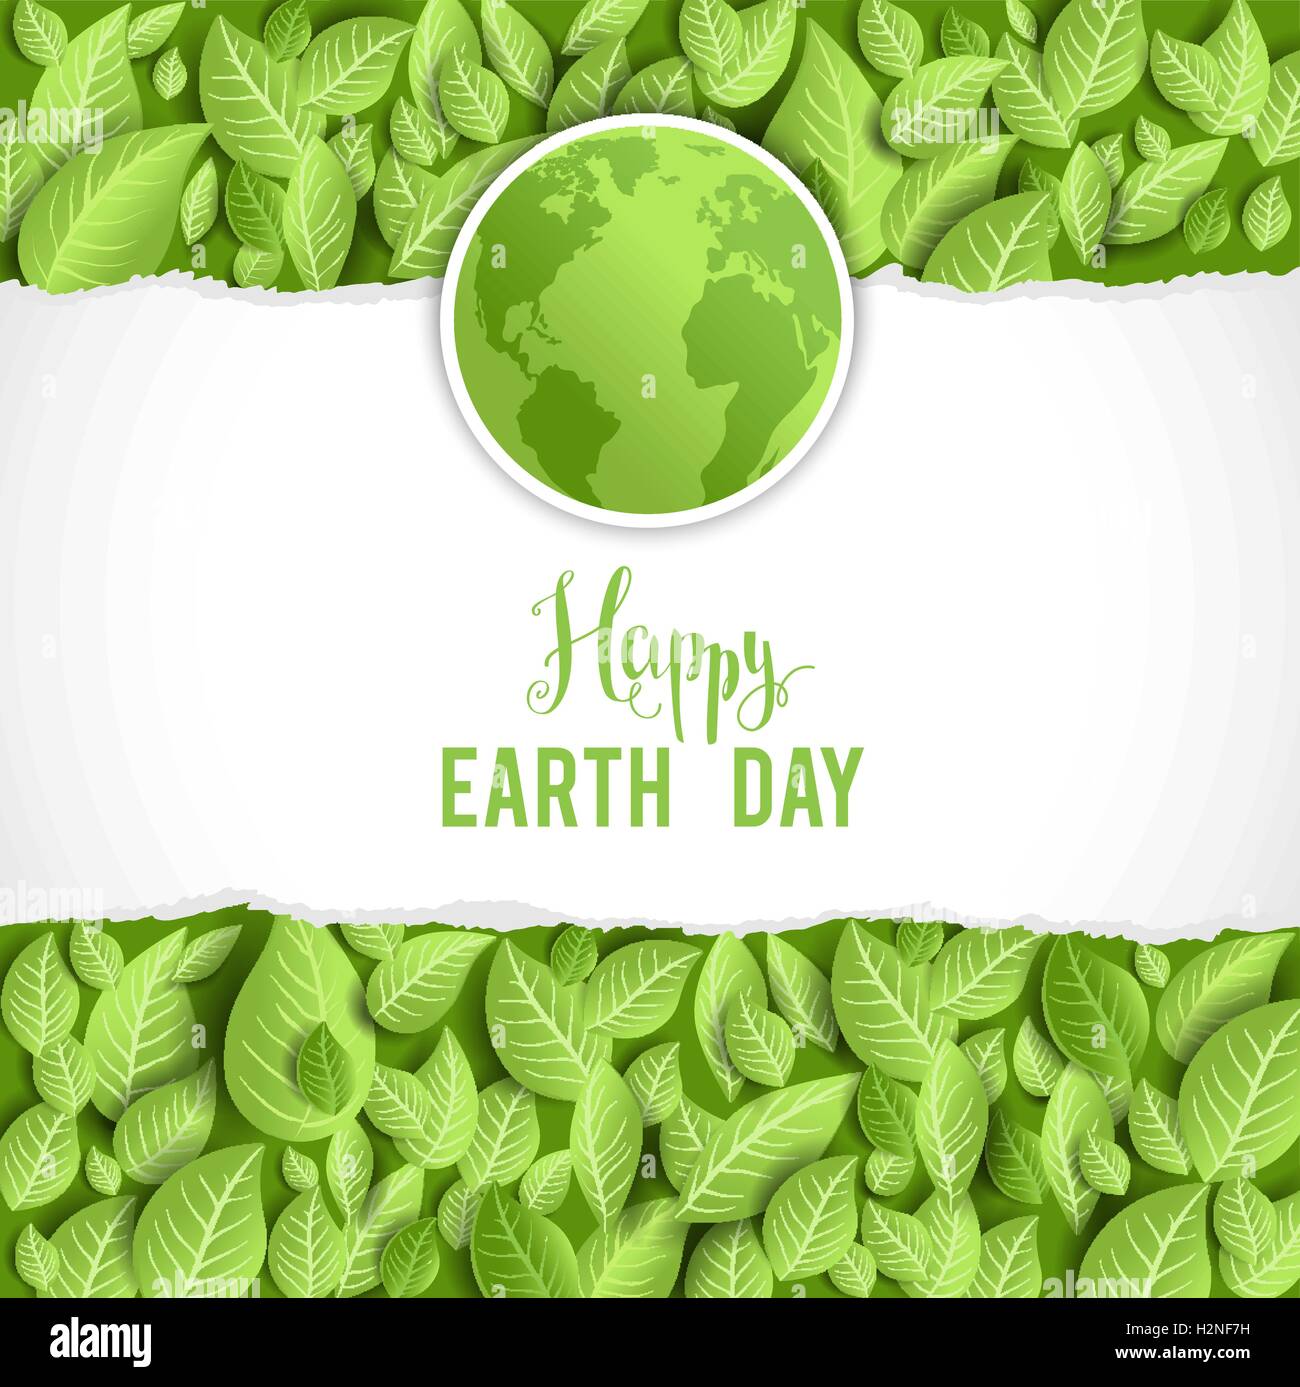 Earth day banner Stock Vector